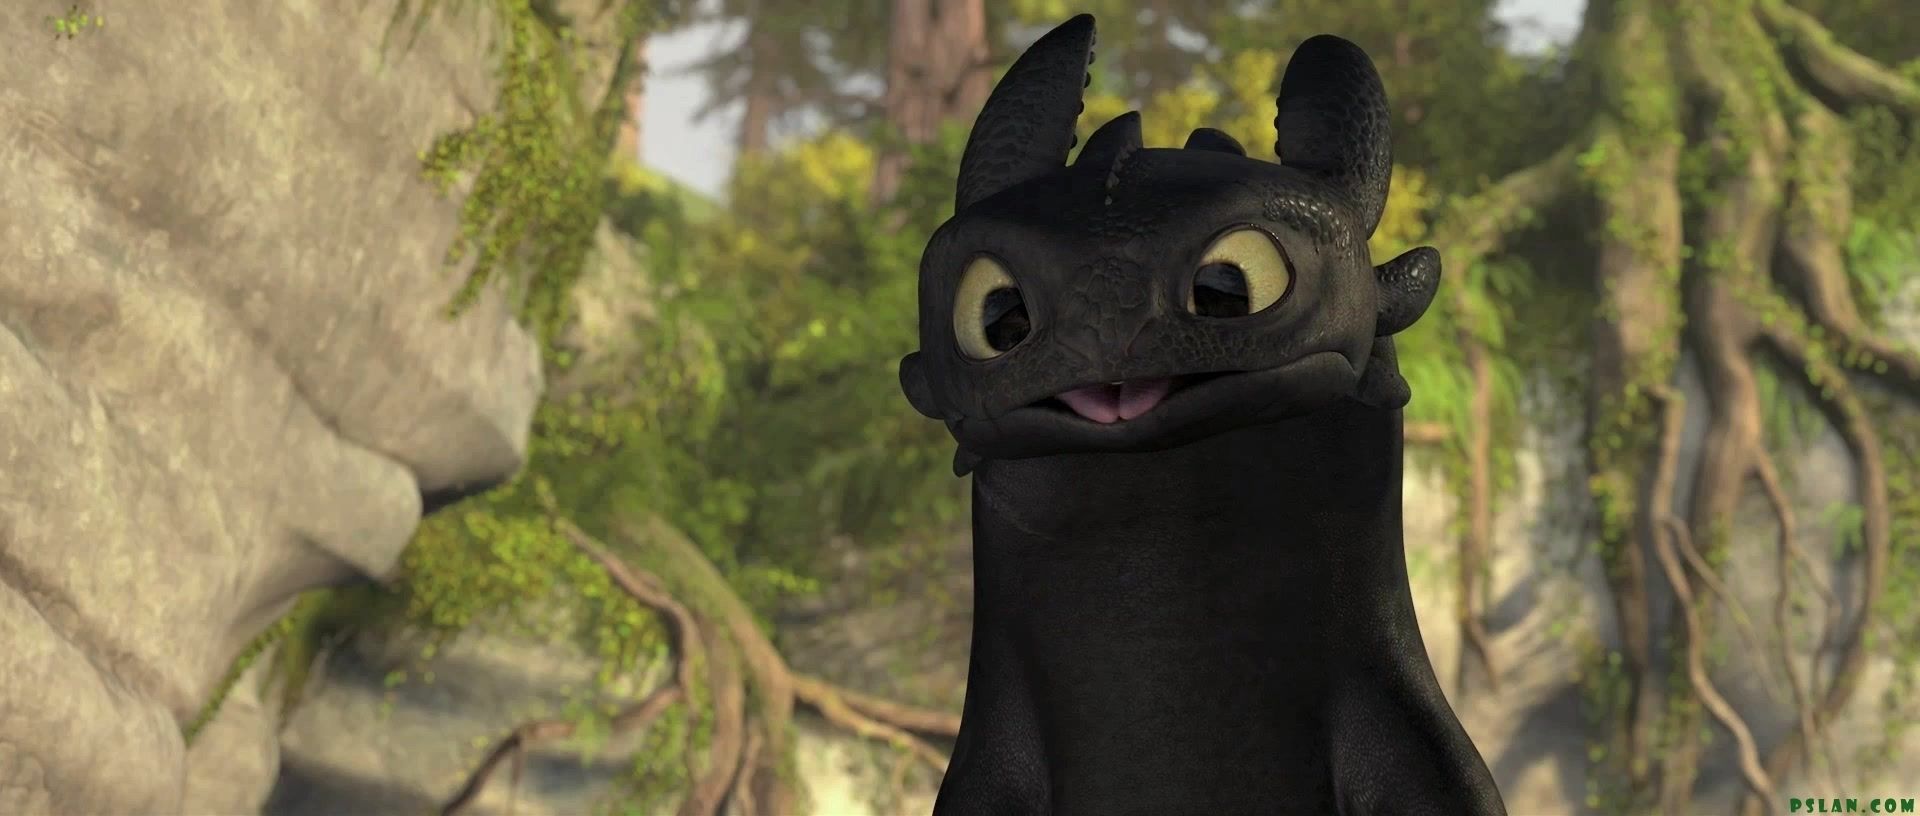 how to train your dragon wallpaper toothless 3 - High Definition ...